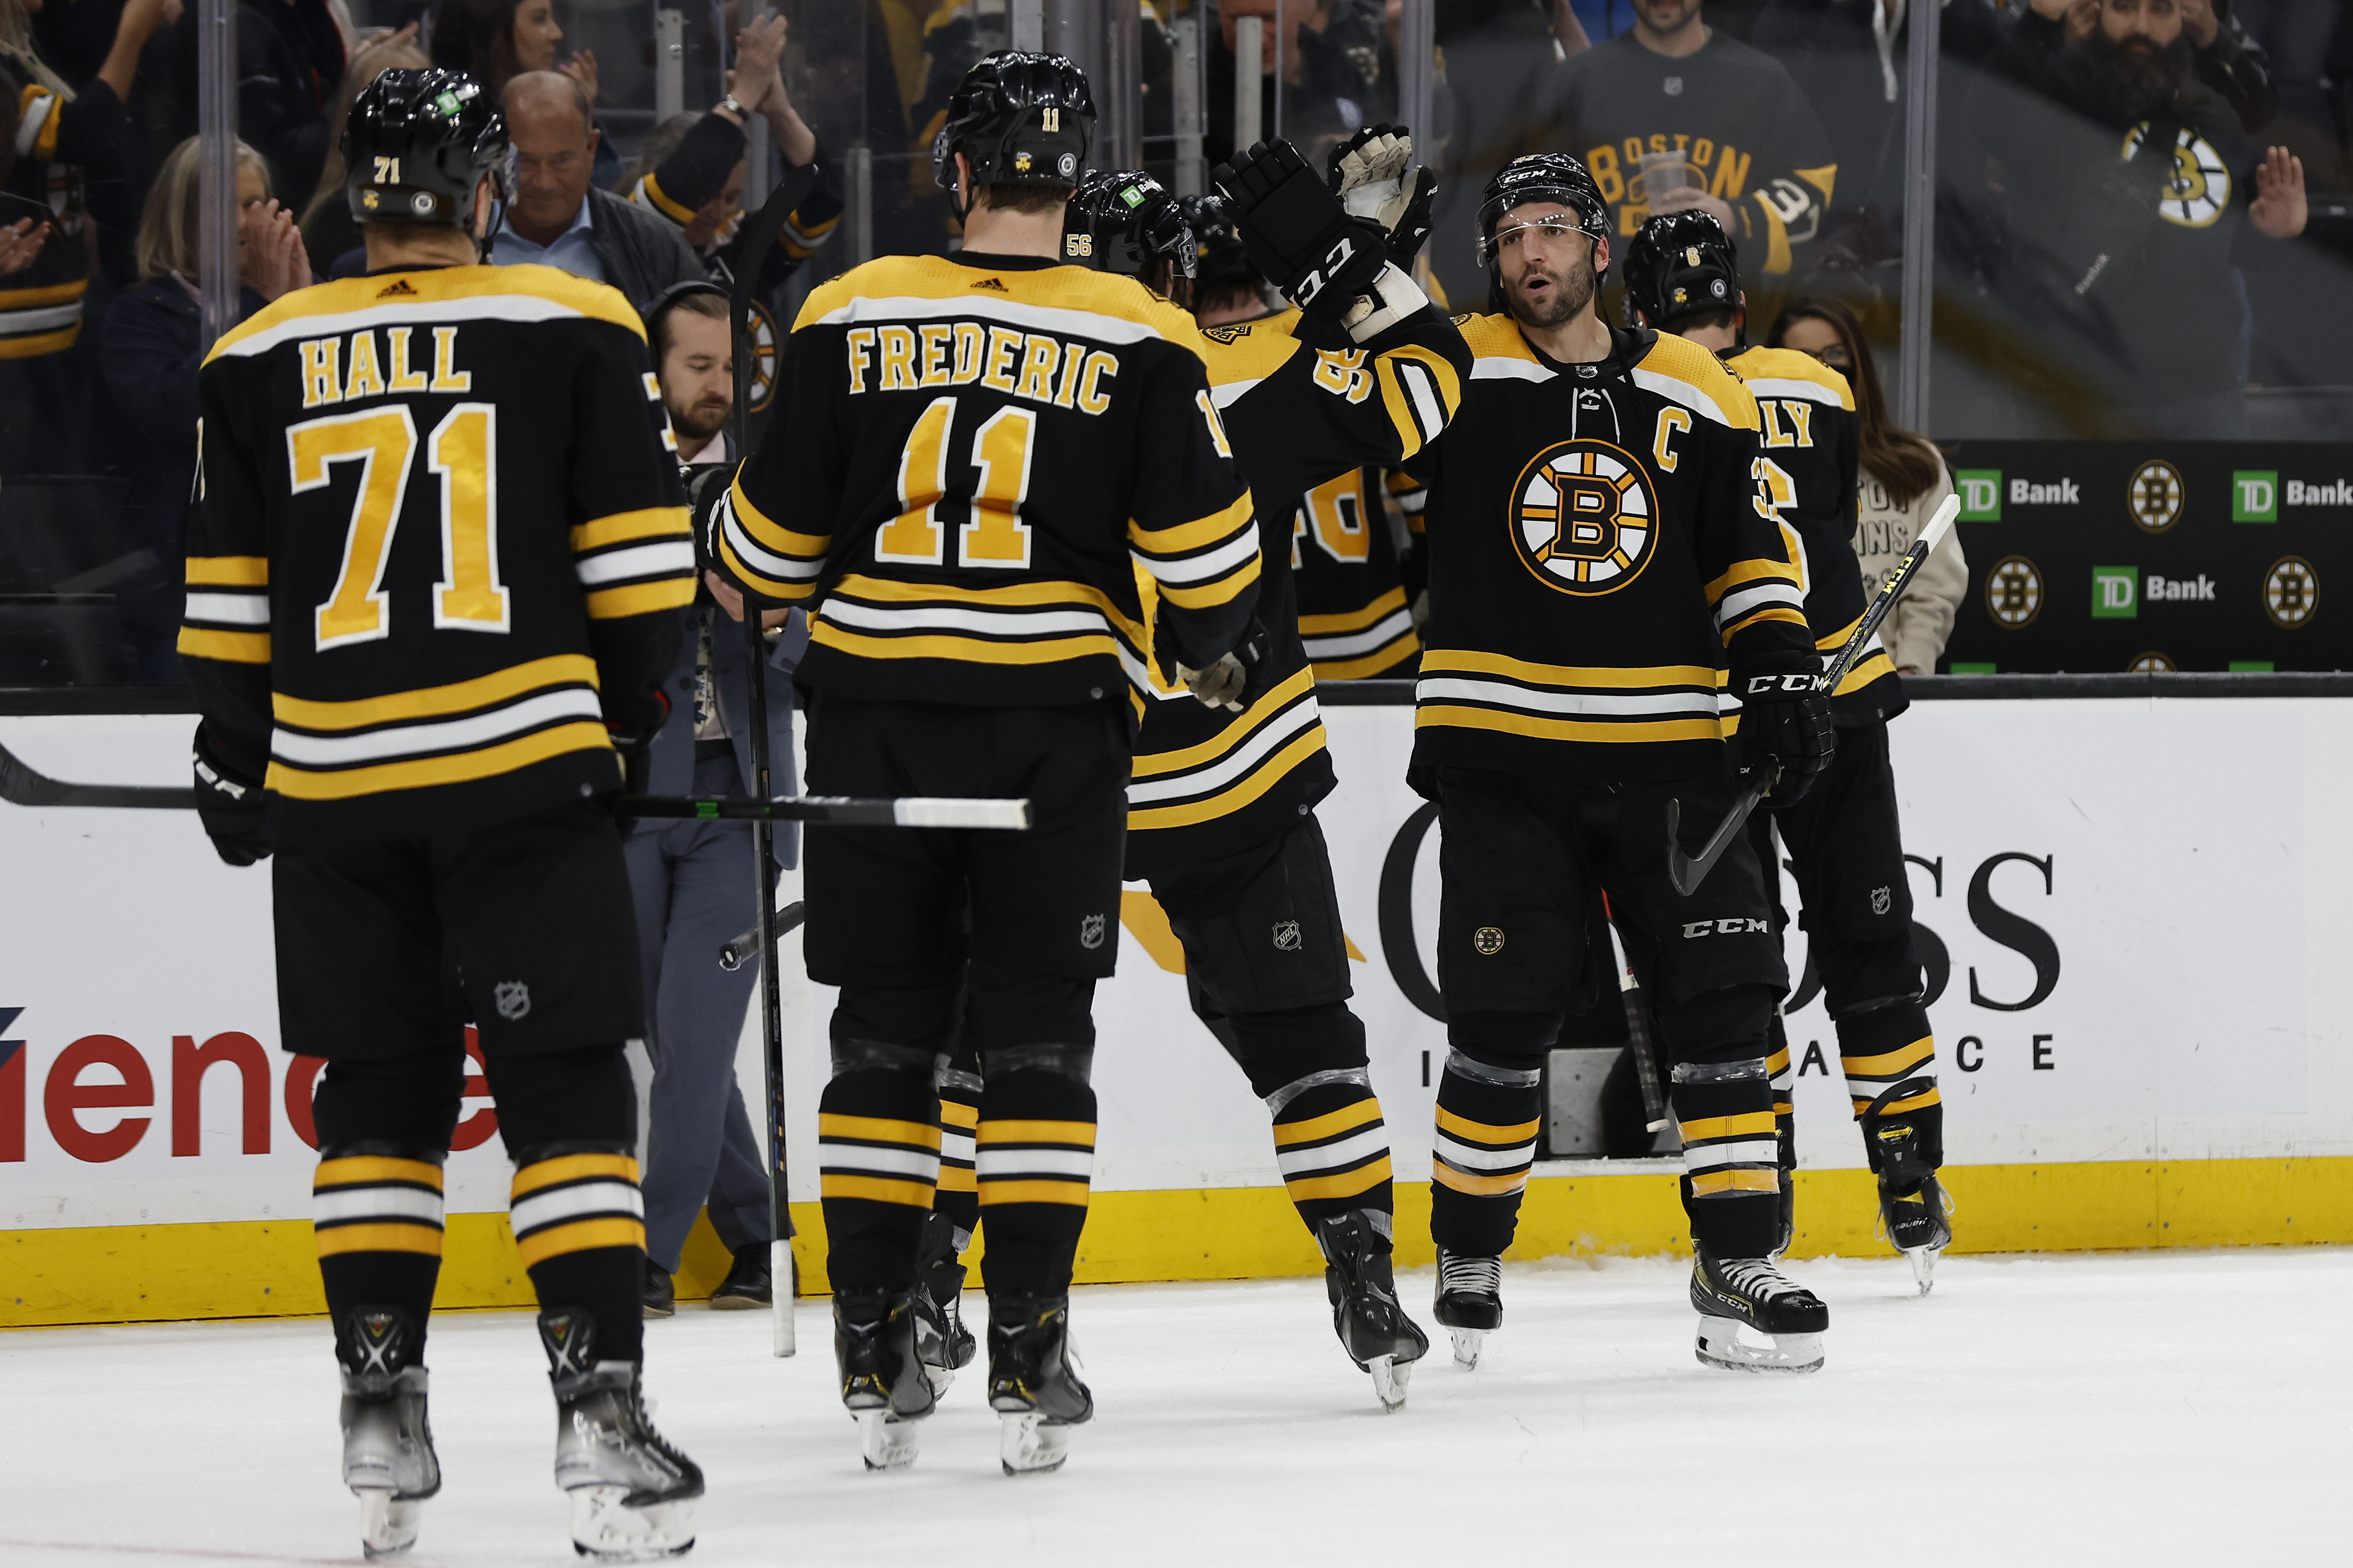 Boston ProShop - A staple of playoff season around TD Garden & Causeway  Street, these Bruins street pole banners are up for grabs! With every $100  you spend on BostonProShop.com using code